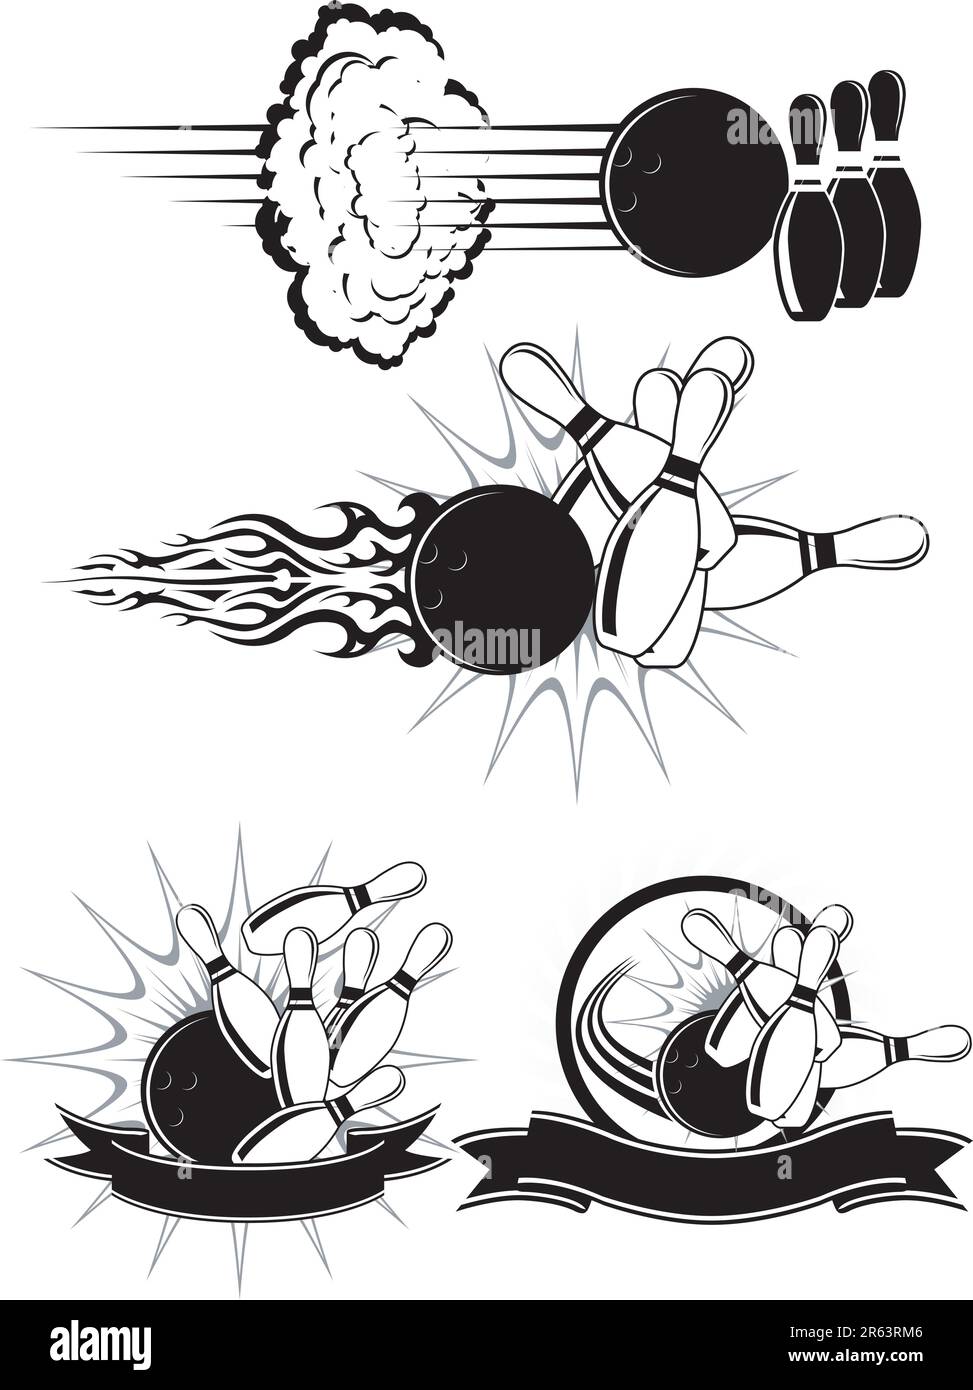 Black And White Bowling clipart styled as emblems Stock Vector